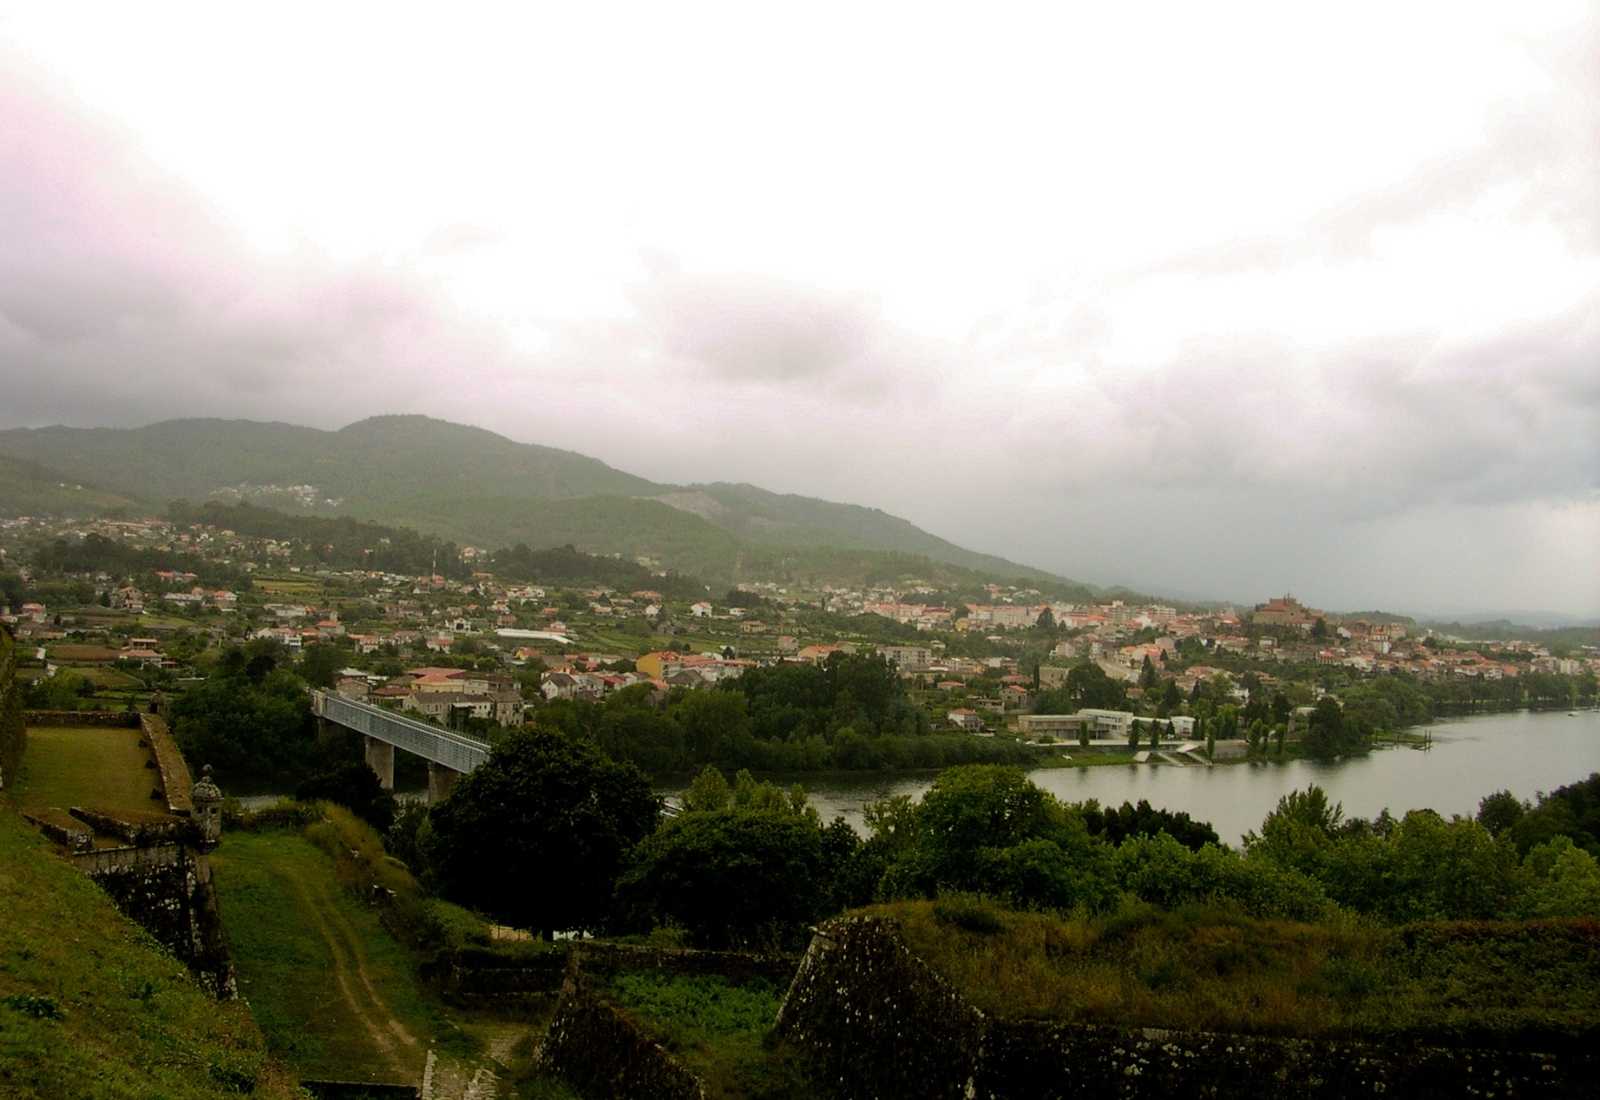 Panoramic view of Tui in winter from Valença do Minho, on the Portuguese Way.